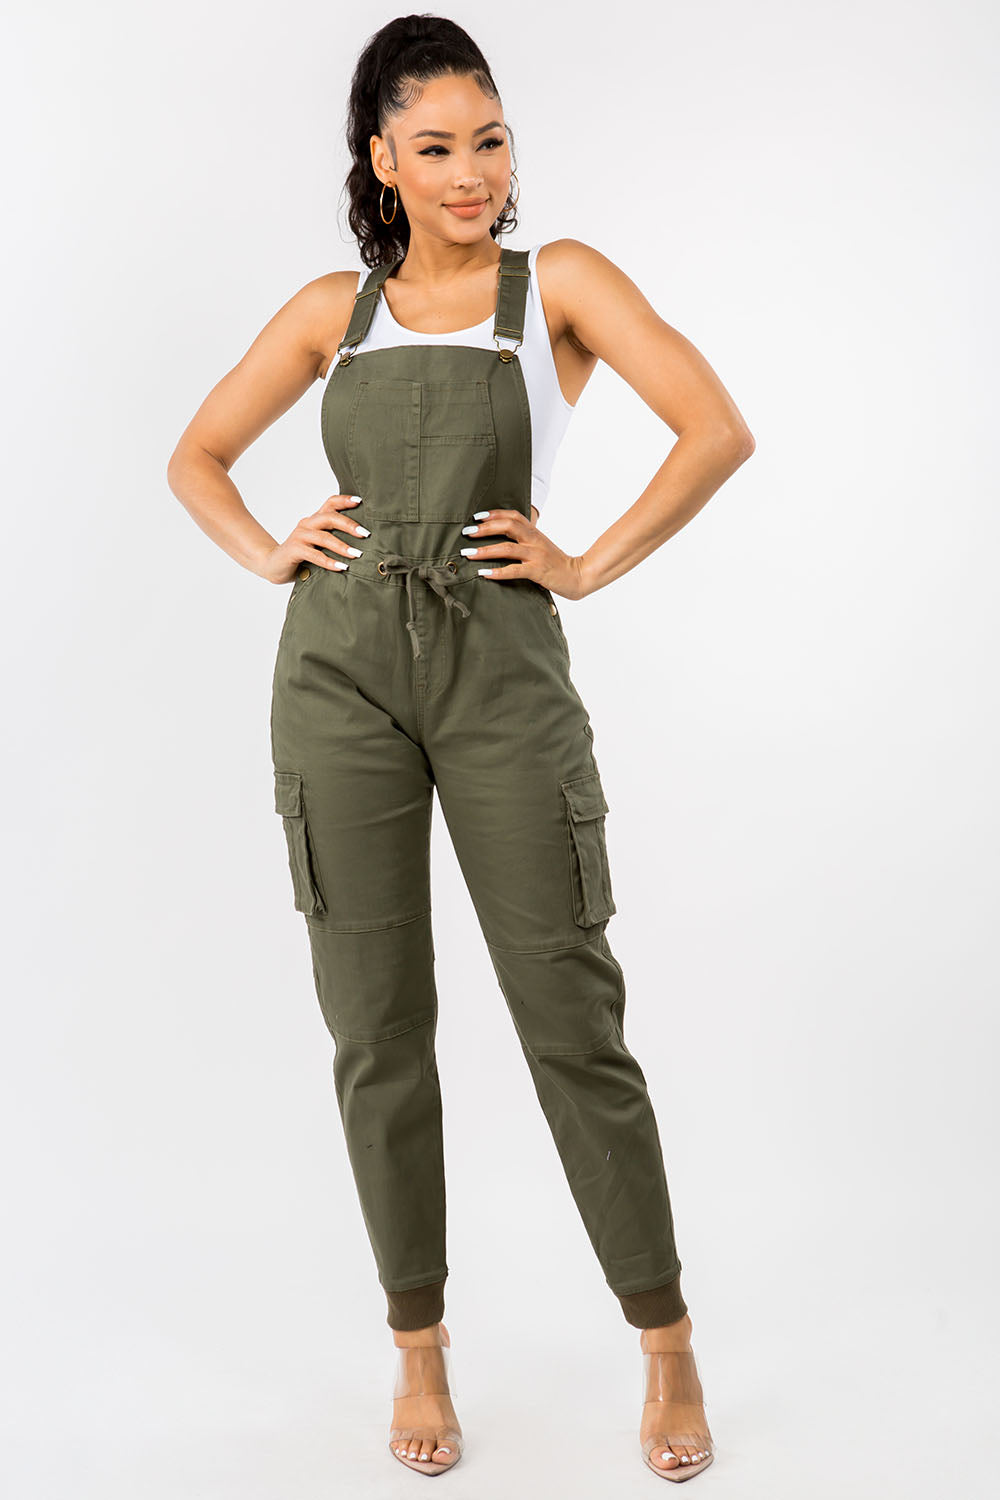 Relaxed Full Length Cargo Overalls w/ Drawstring Waist - Plus Size